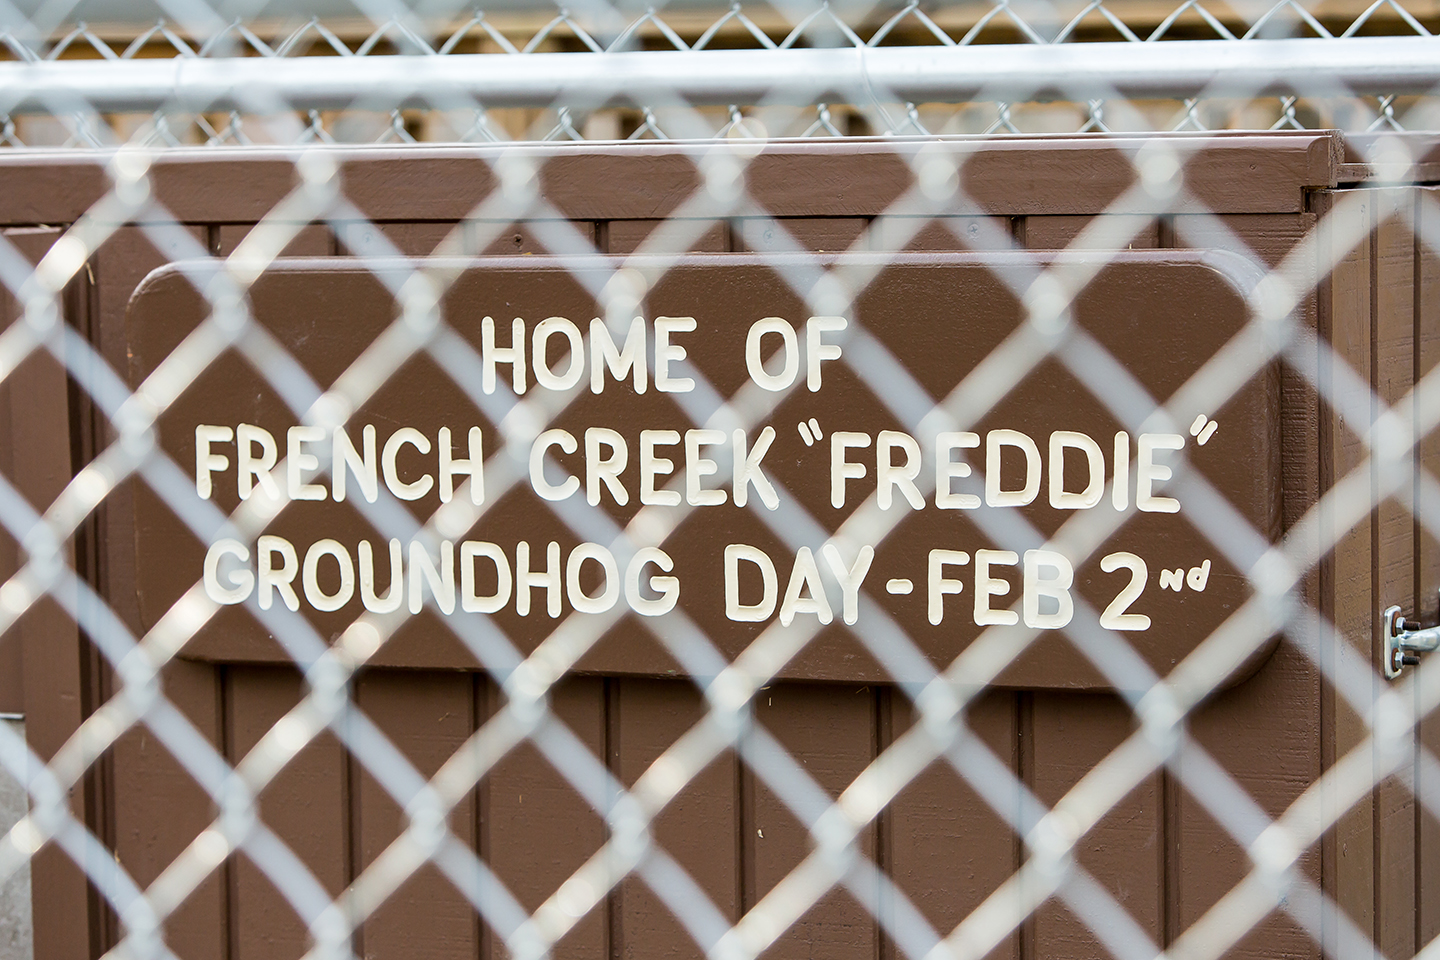 French Creek Freddie Facts To Get You Ready For Groundhog Day